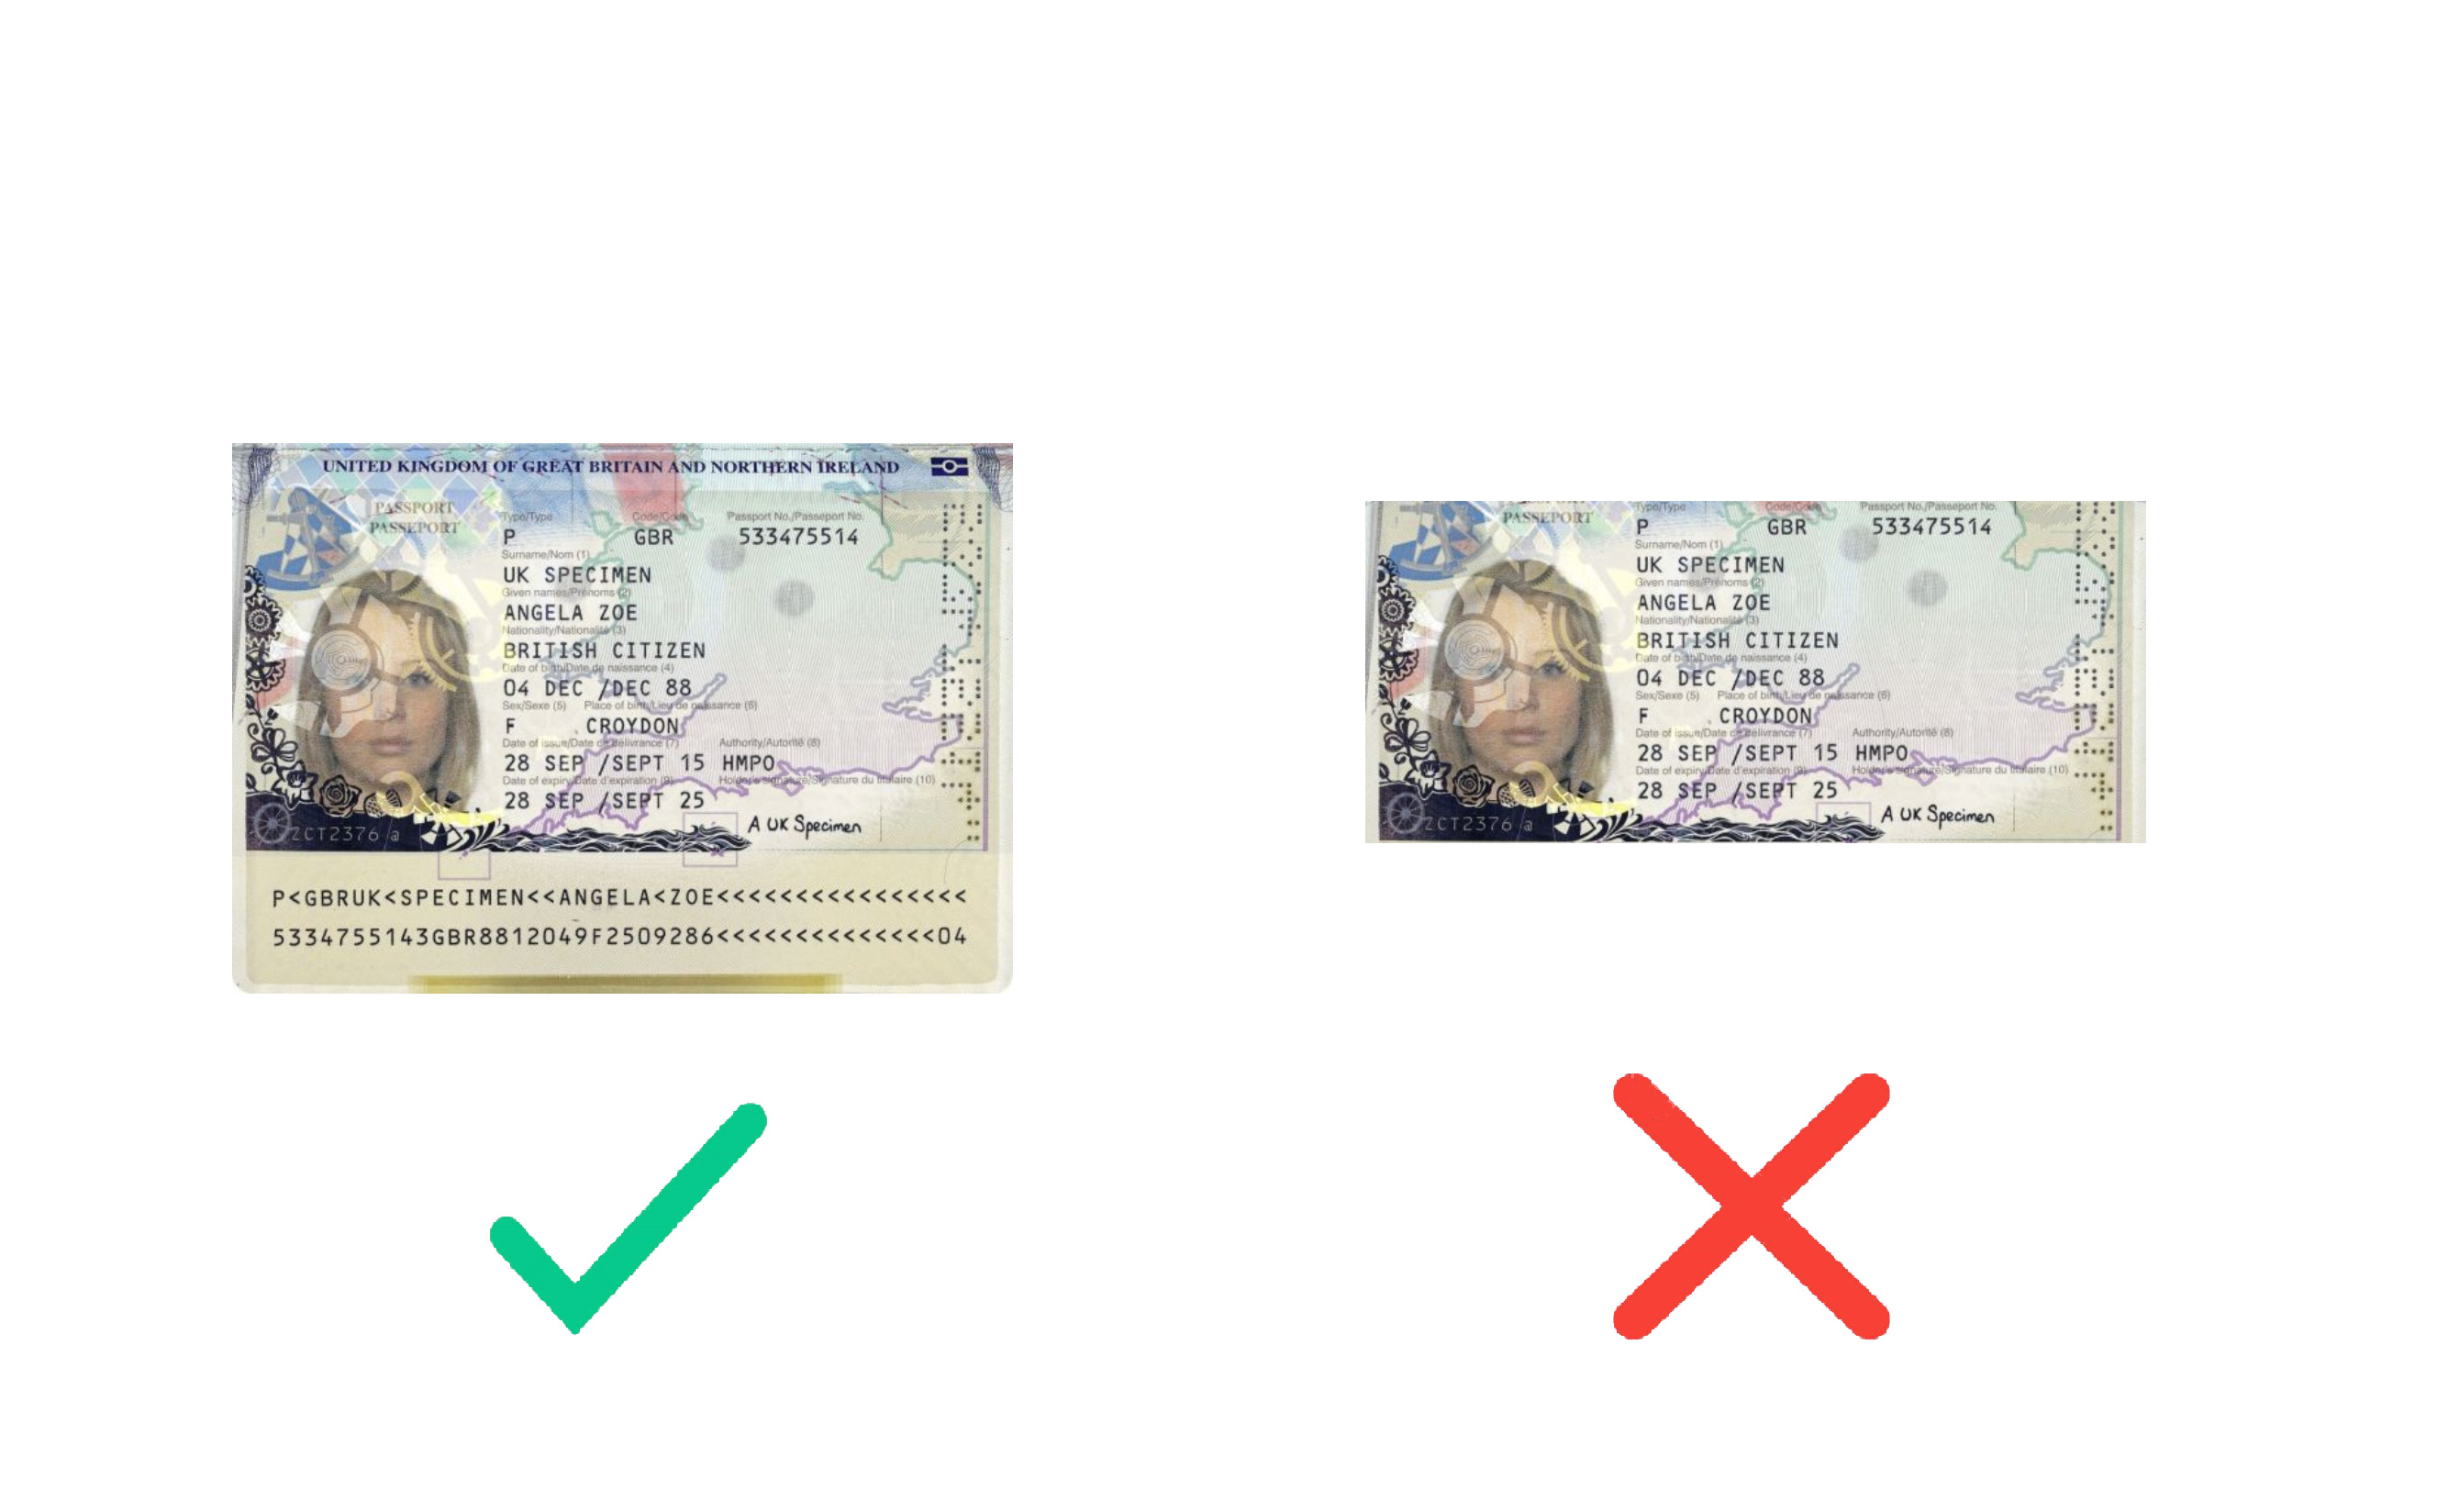 Passport_yes_and_no.png